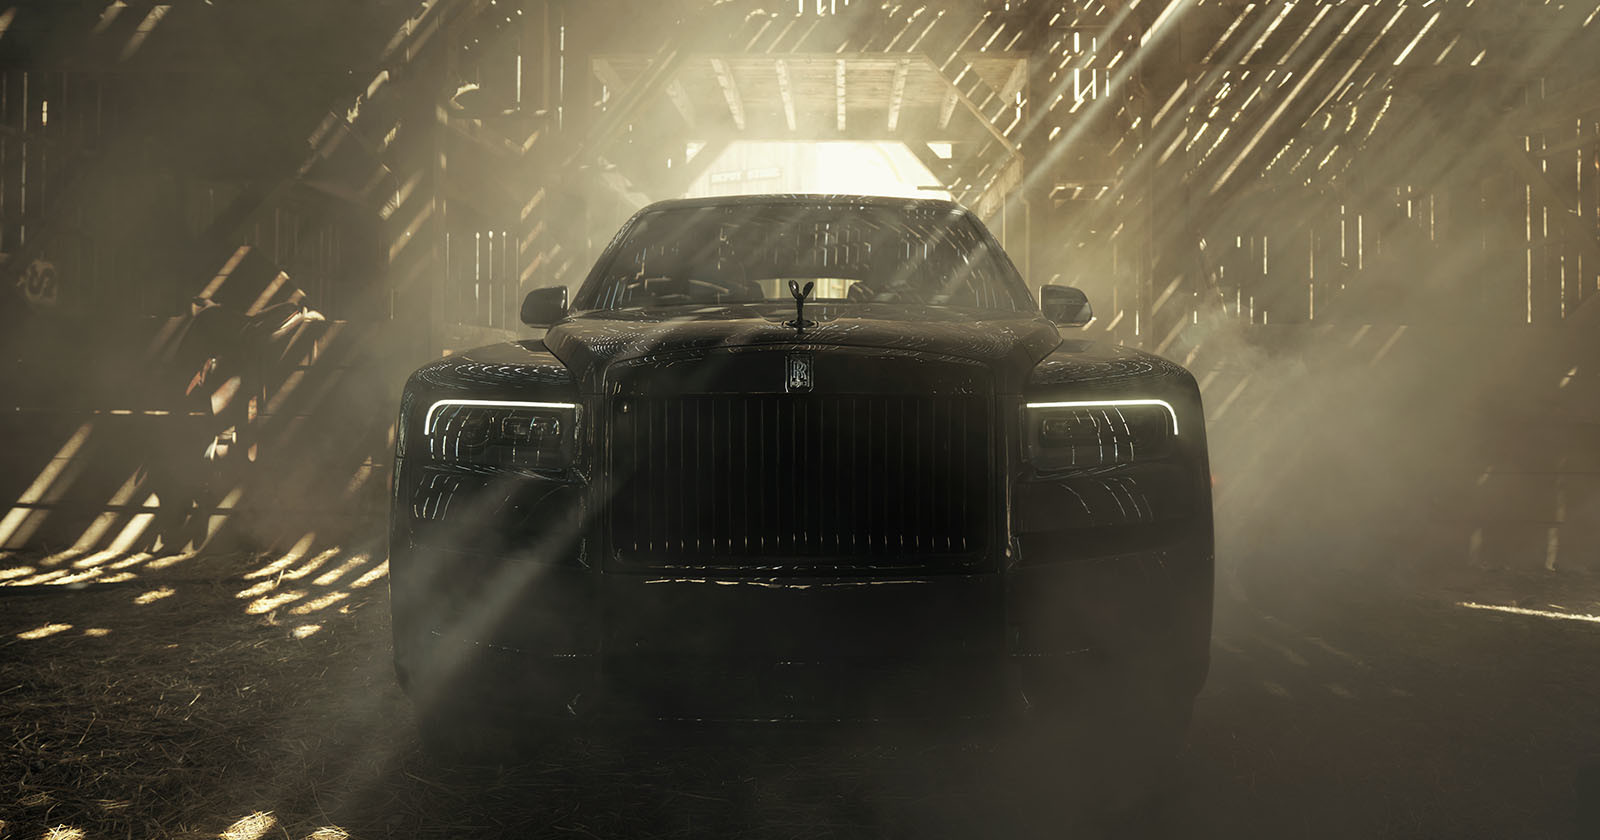 The Making of Western-Inspired Rolls-Royce Commercial The Frontier